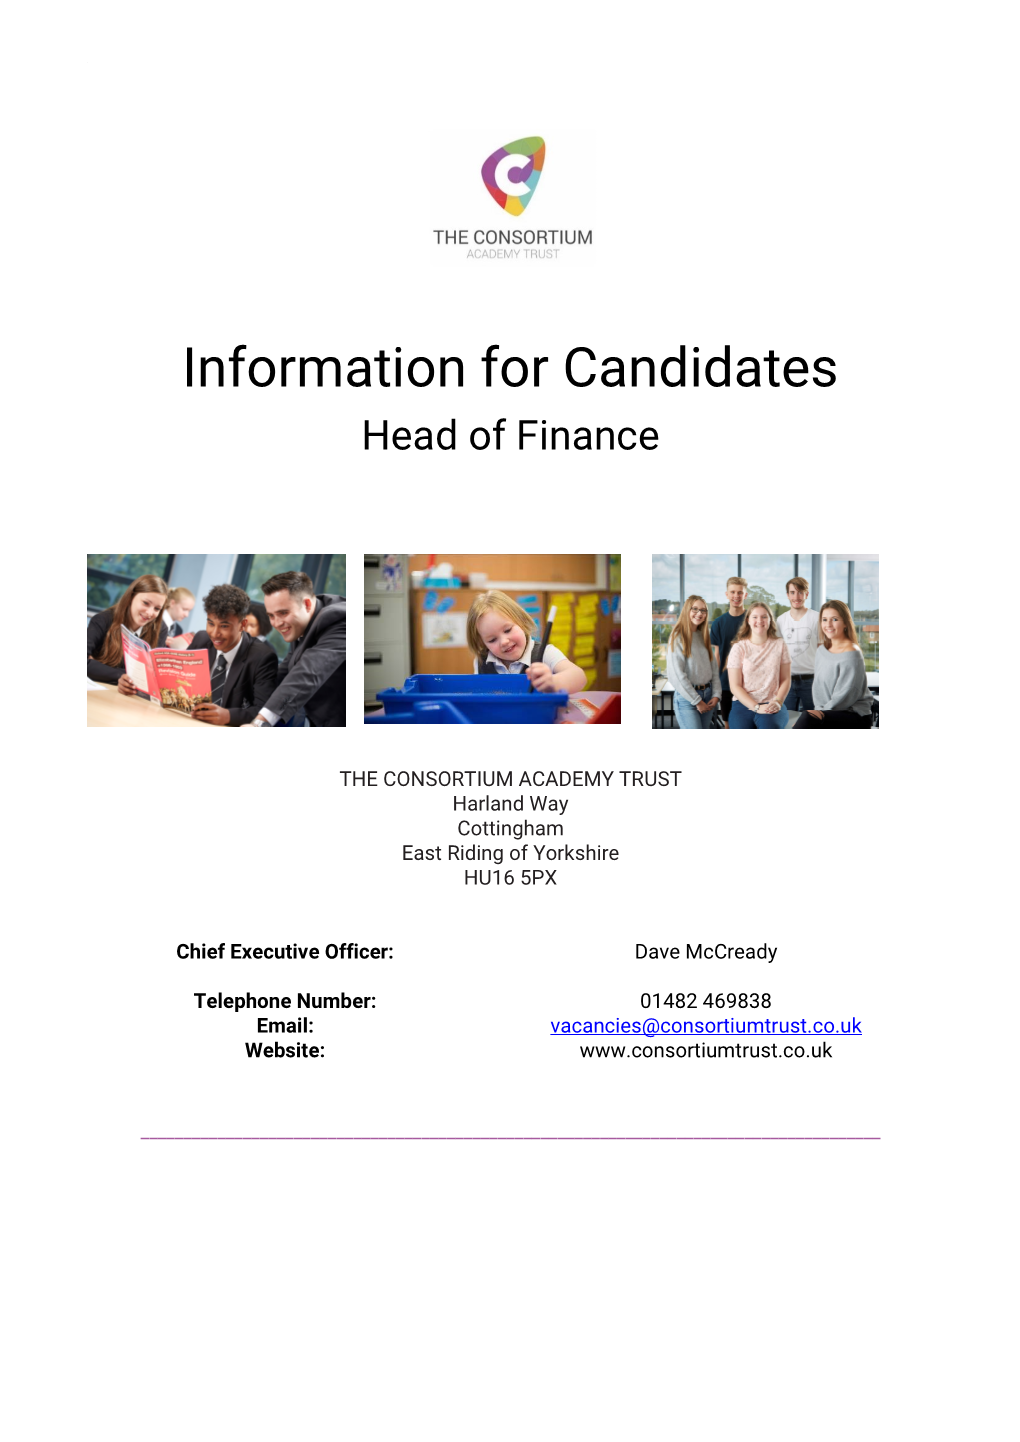 Information for Candidates Head of Finance